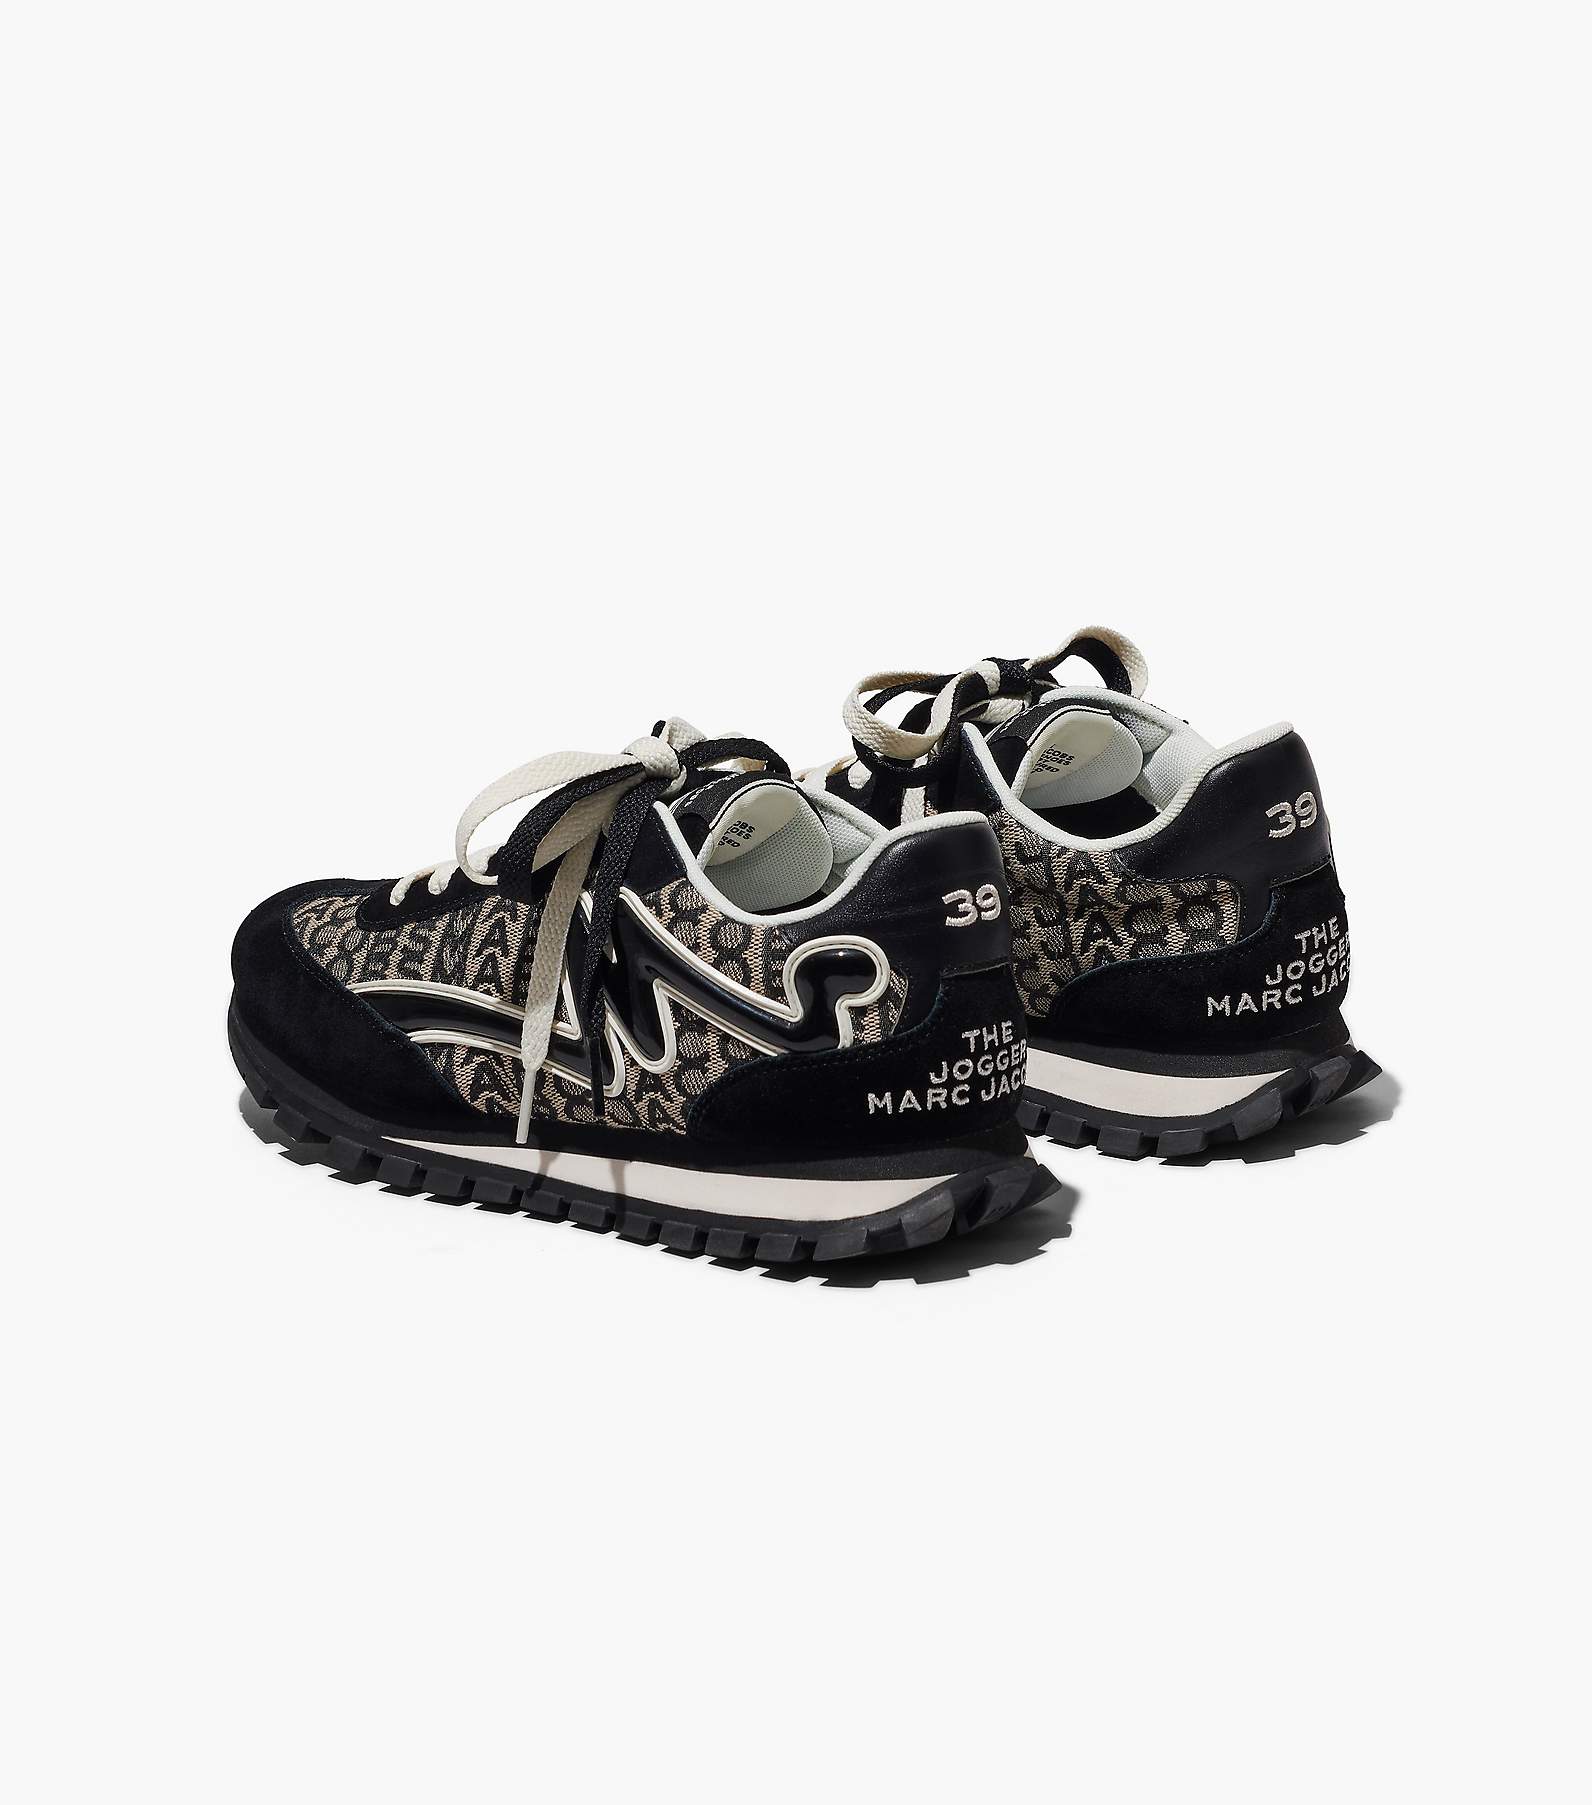 MARC JACOBS THE JOGGER SHOES BLACK MULTI SIZE 36 Brand New